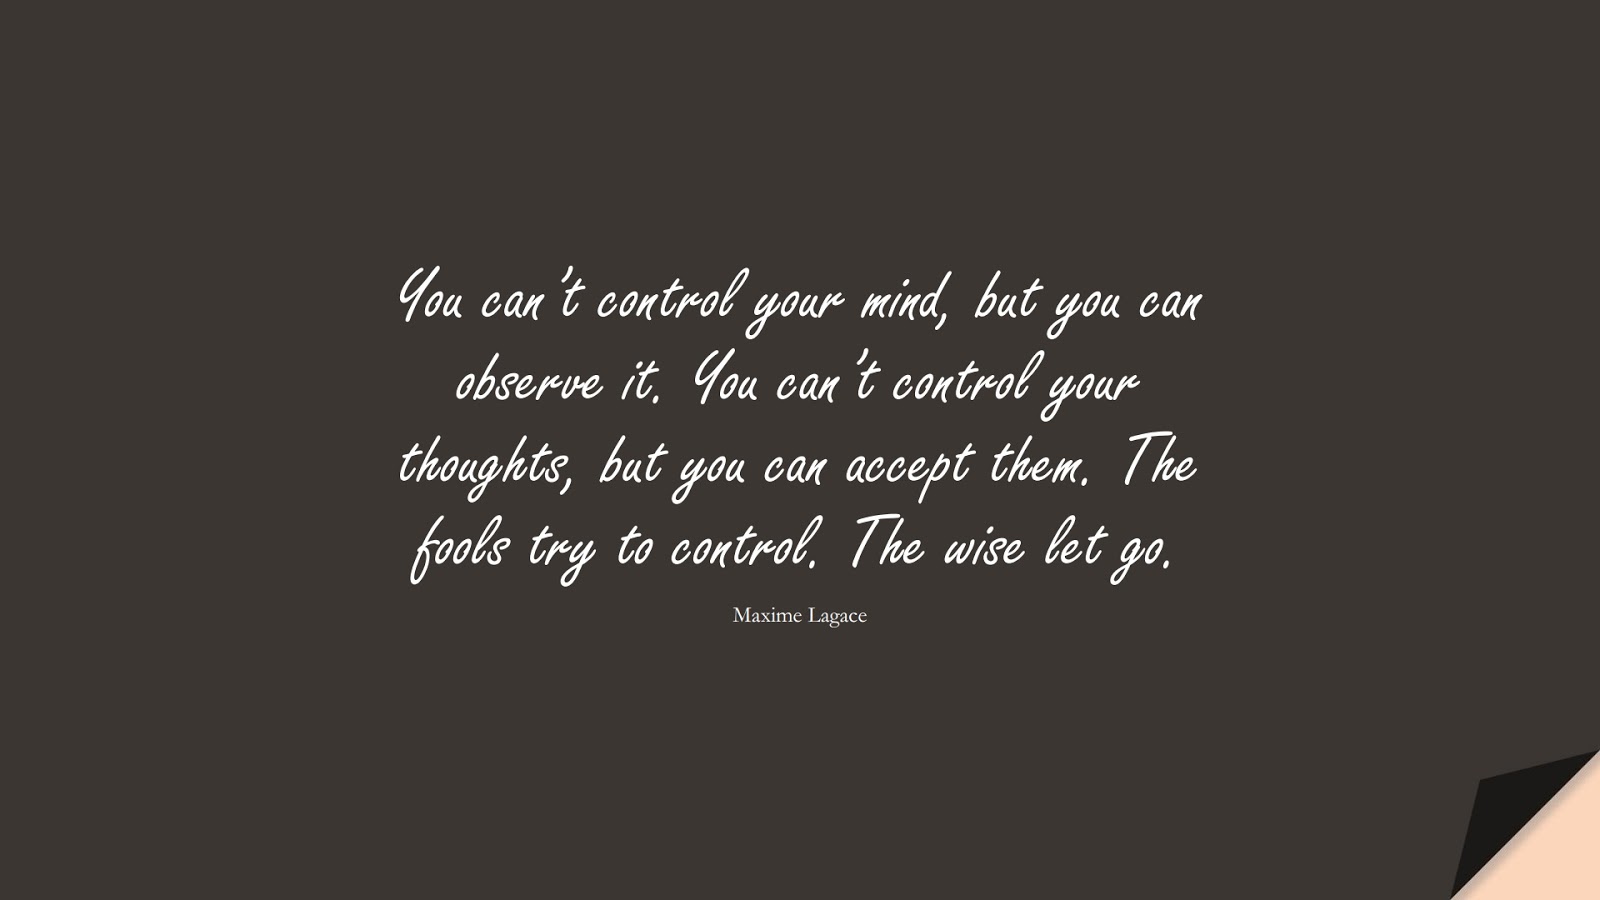 You can’t control your mind, but you can observe it. You can’t control your thoughts, but you can accept them. The fools try to control. The wise let go. (Maxime Lagace);  #CalmQuotes